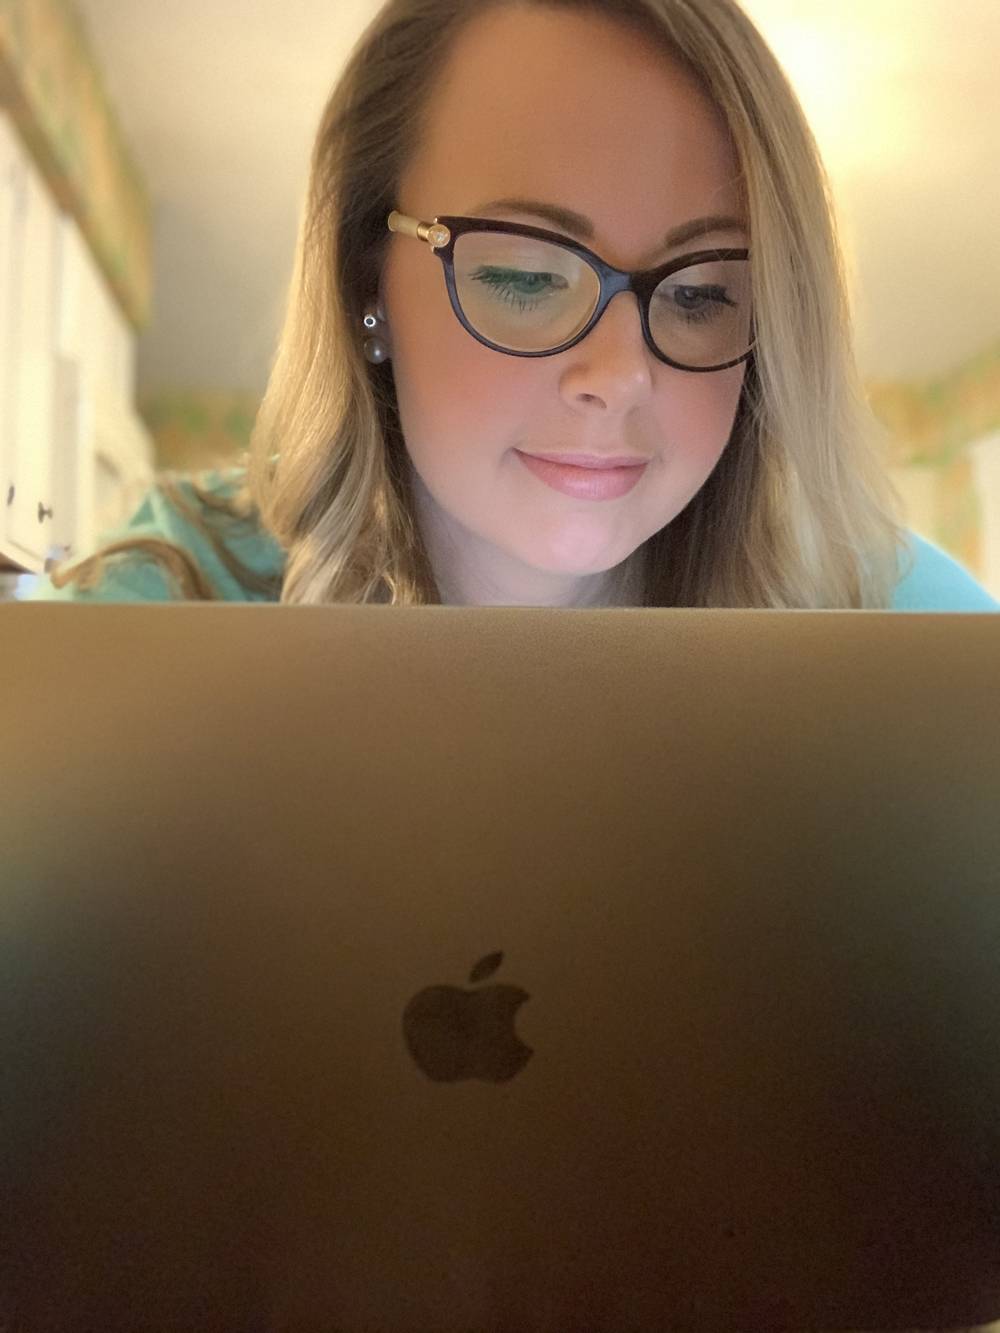 A woman with blonde hair and dark glasses looks down at a laptop computer. Photo by Stephanie Stuart.